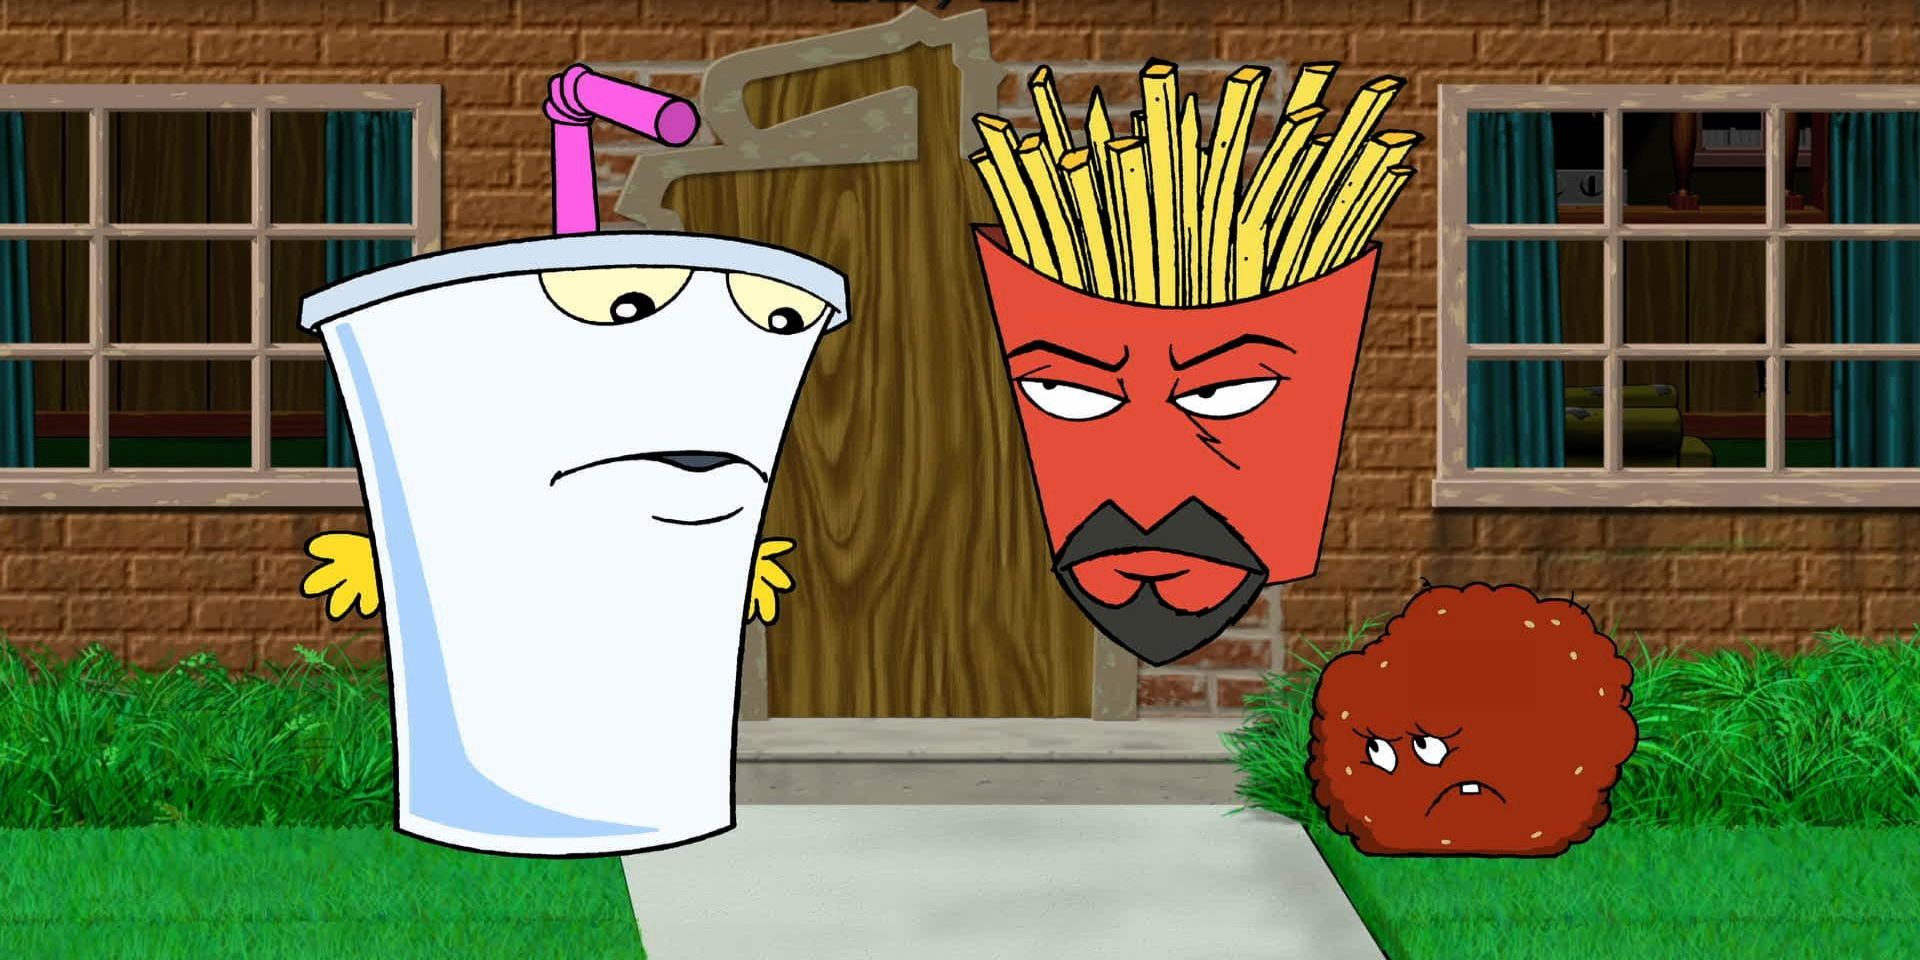 The cast of characters from the Adult Swim series Aqua Teen Hunger Force.